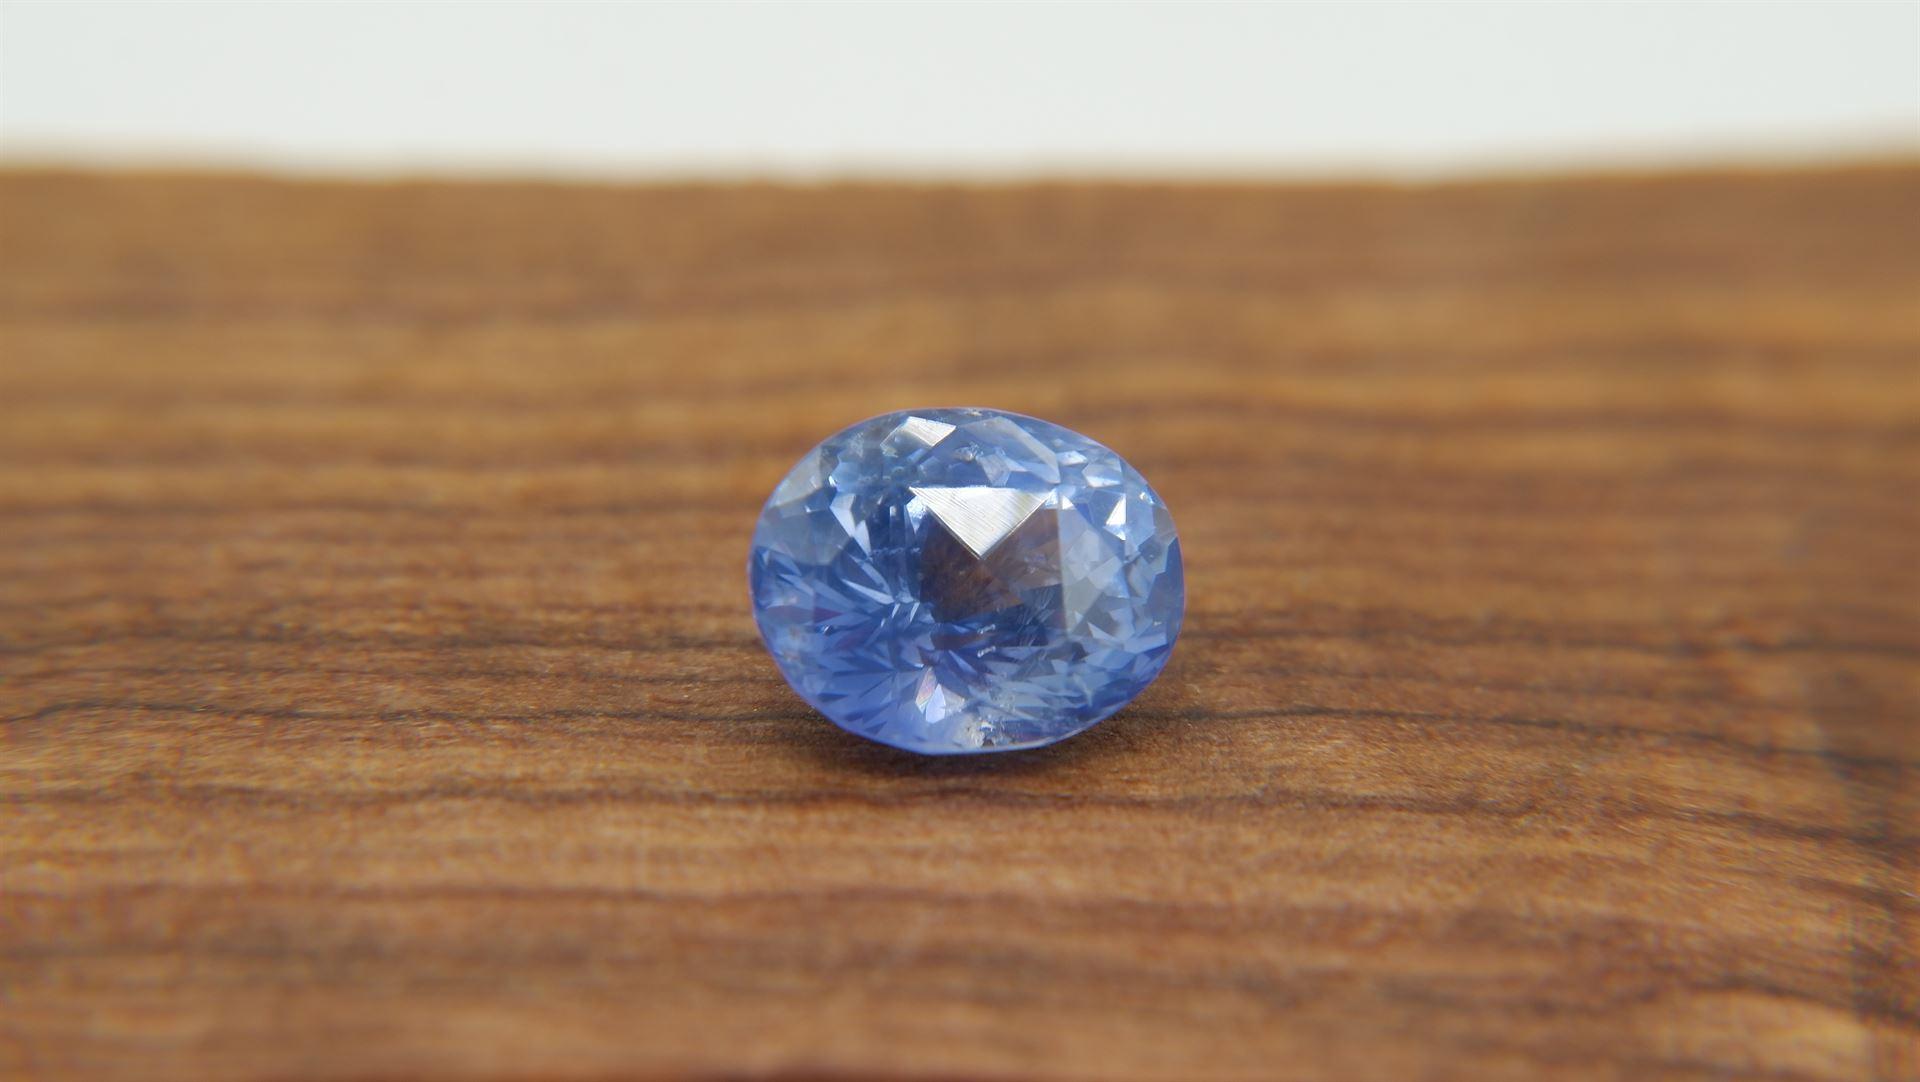 Women's or Men's 3.16 ct Vivid Blue Sapphire, Ceylon, Handcrafted, GIA For Sale